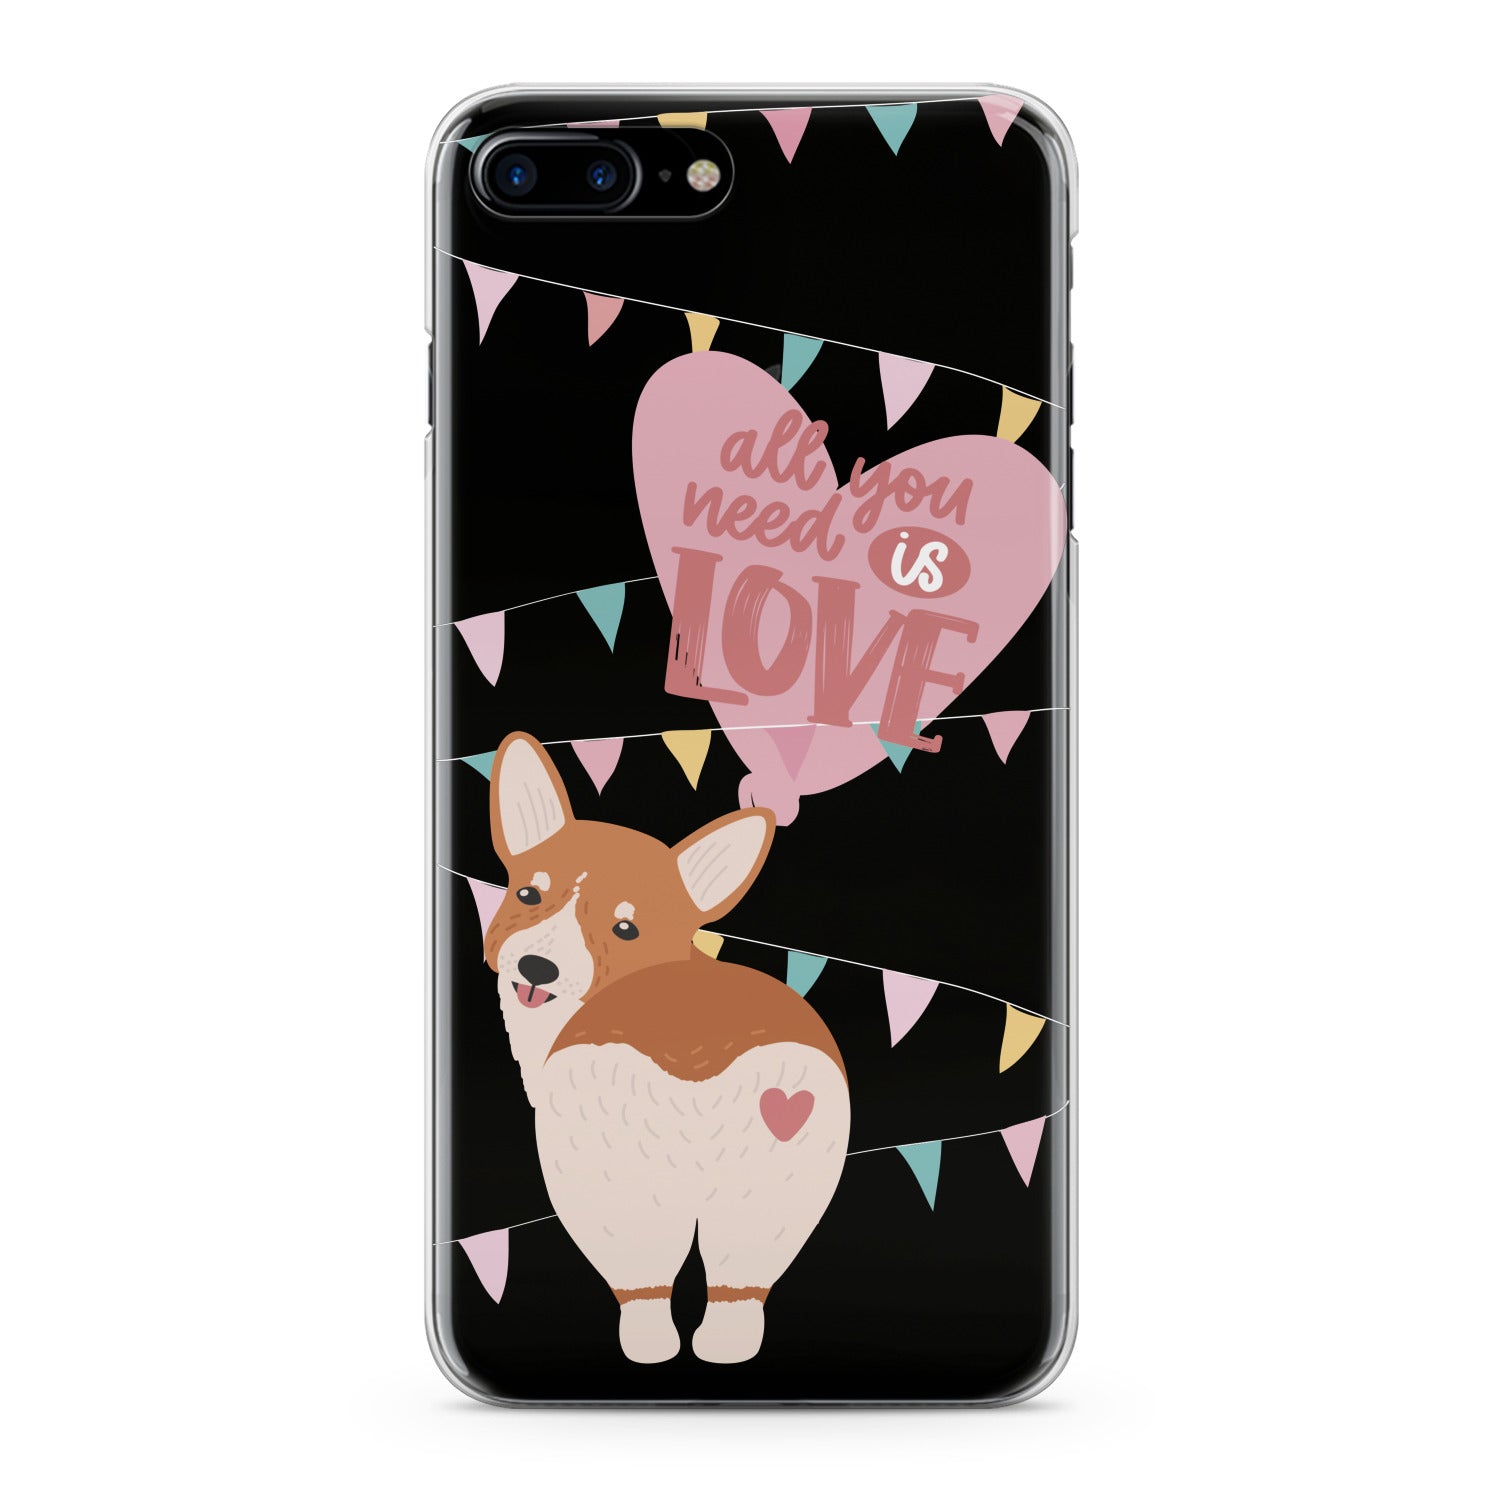 Lex Altern Love Corgi Puppy Phone Case for your iPhone & Android phone.